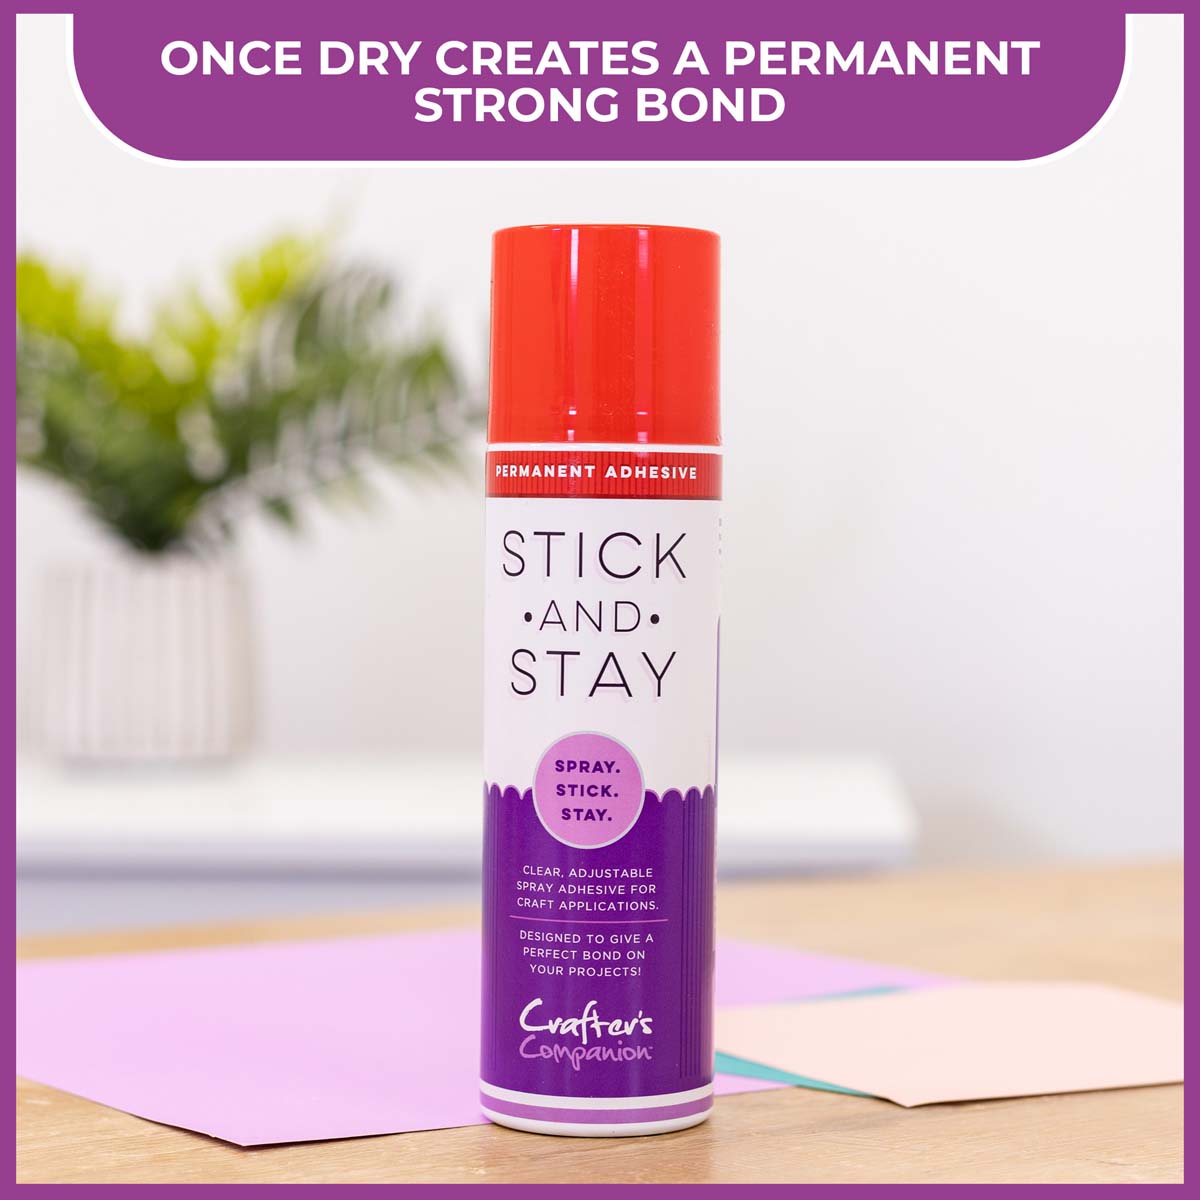 Crafter's Companion - Stick and Stay Mounting Adhesive (RED CAN)